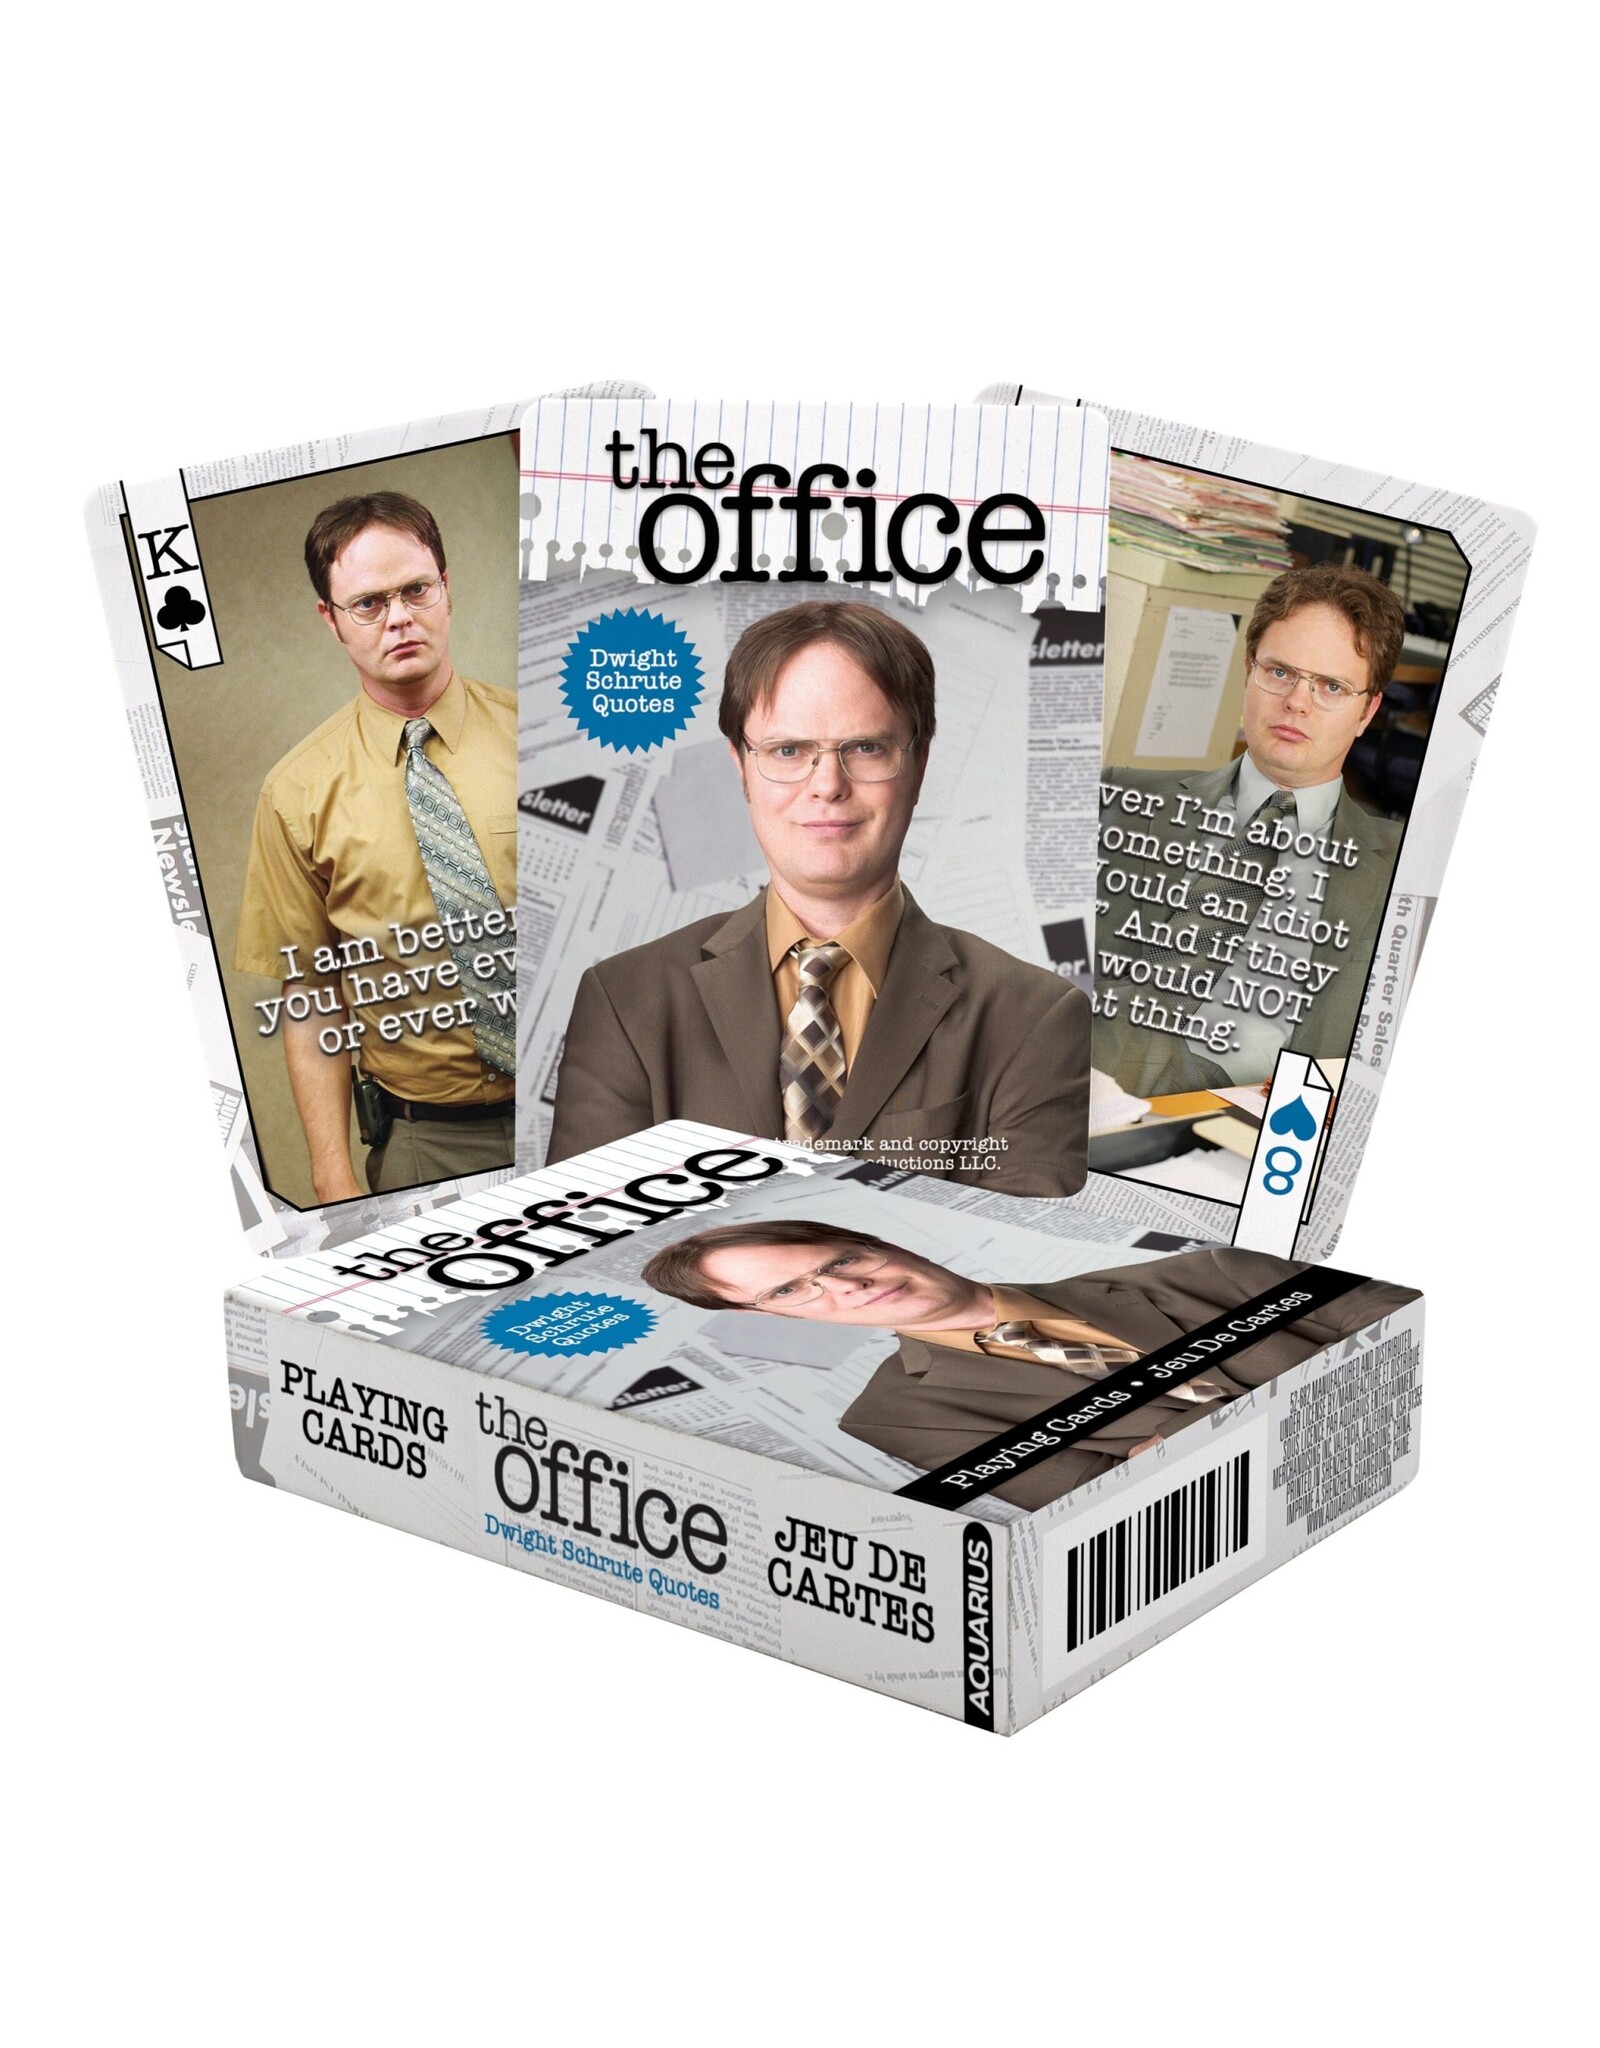 NMR The Office – Dwight Quotes Playing Cards